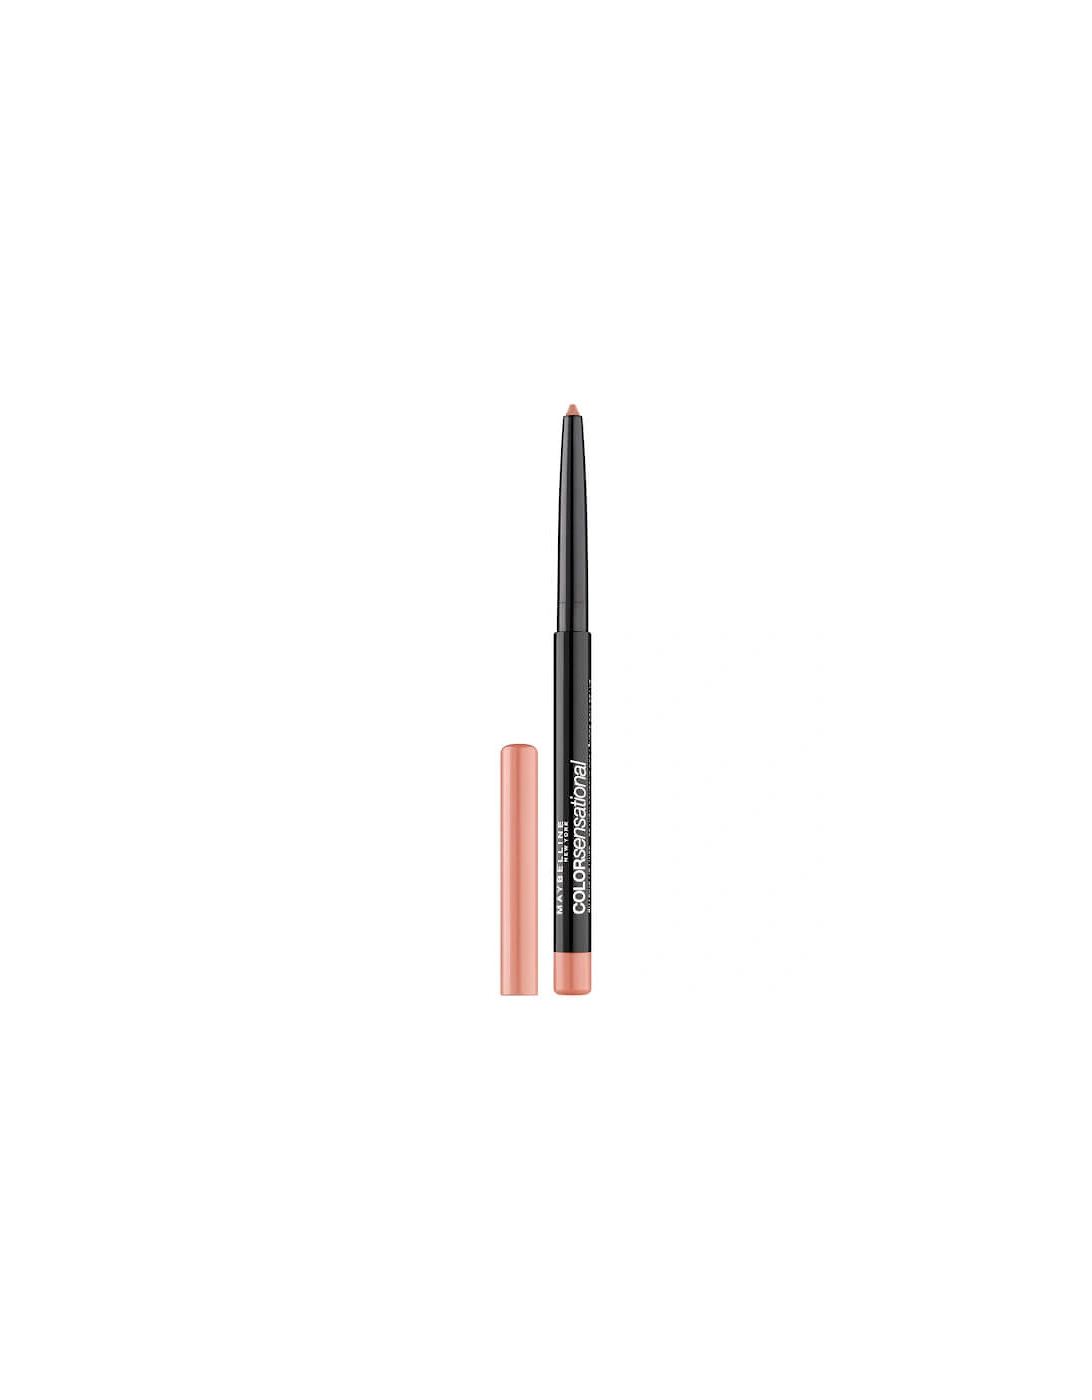 Colorshow Shaping Lip Liner - 90 Brick Red - - Colorshow Shaping Lip Liner - 10 Nude Whisper - Colorshow Shaping Lip Liner - 50 Dusty Rose - Colorshow Shaping Lip Liner - 60 Palest Pink - Colorshow Shaping Lip Liner - 90 Brick Red - Colorshow Shaping Lip Liner - 110 Rich Wine, 2 of 1